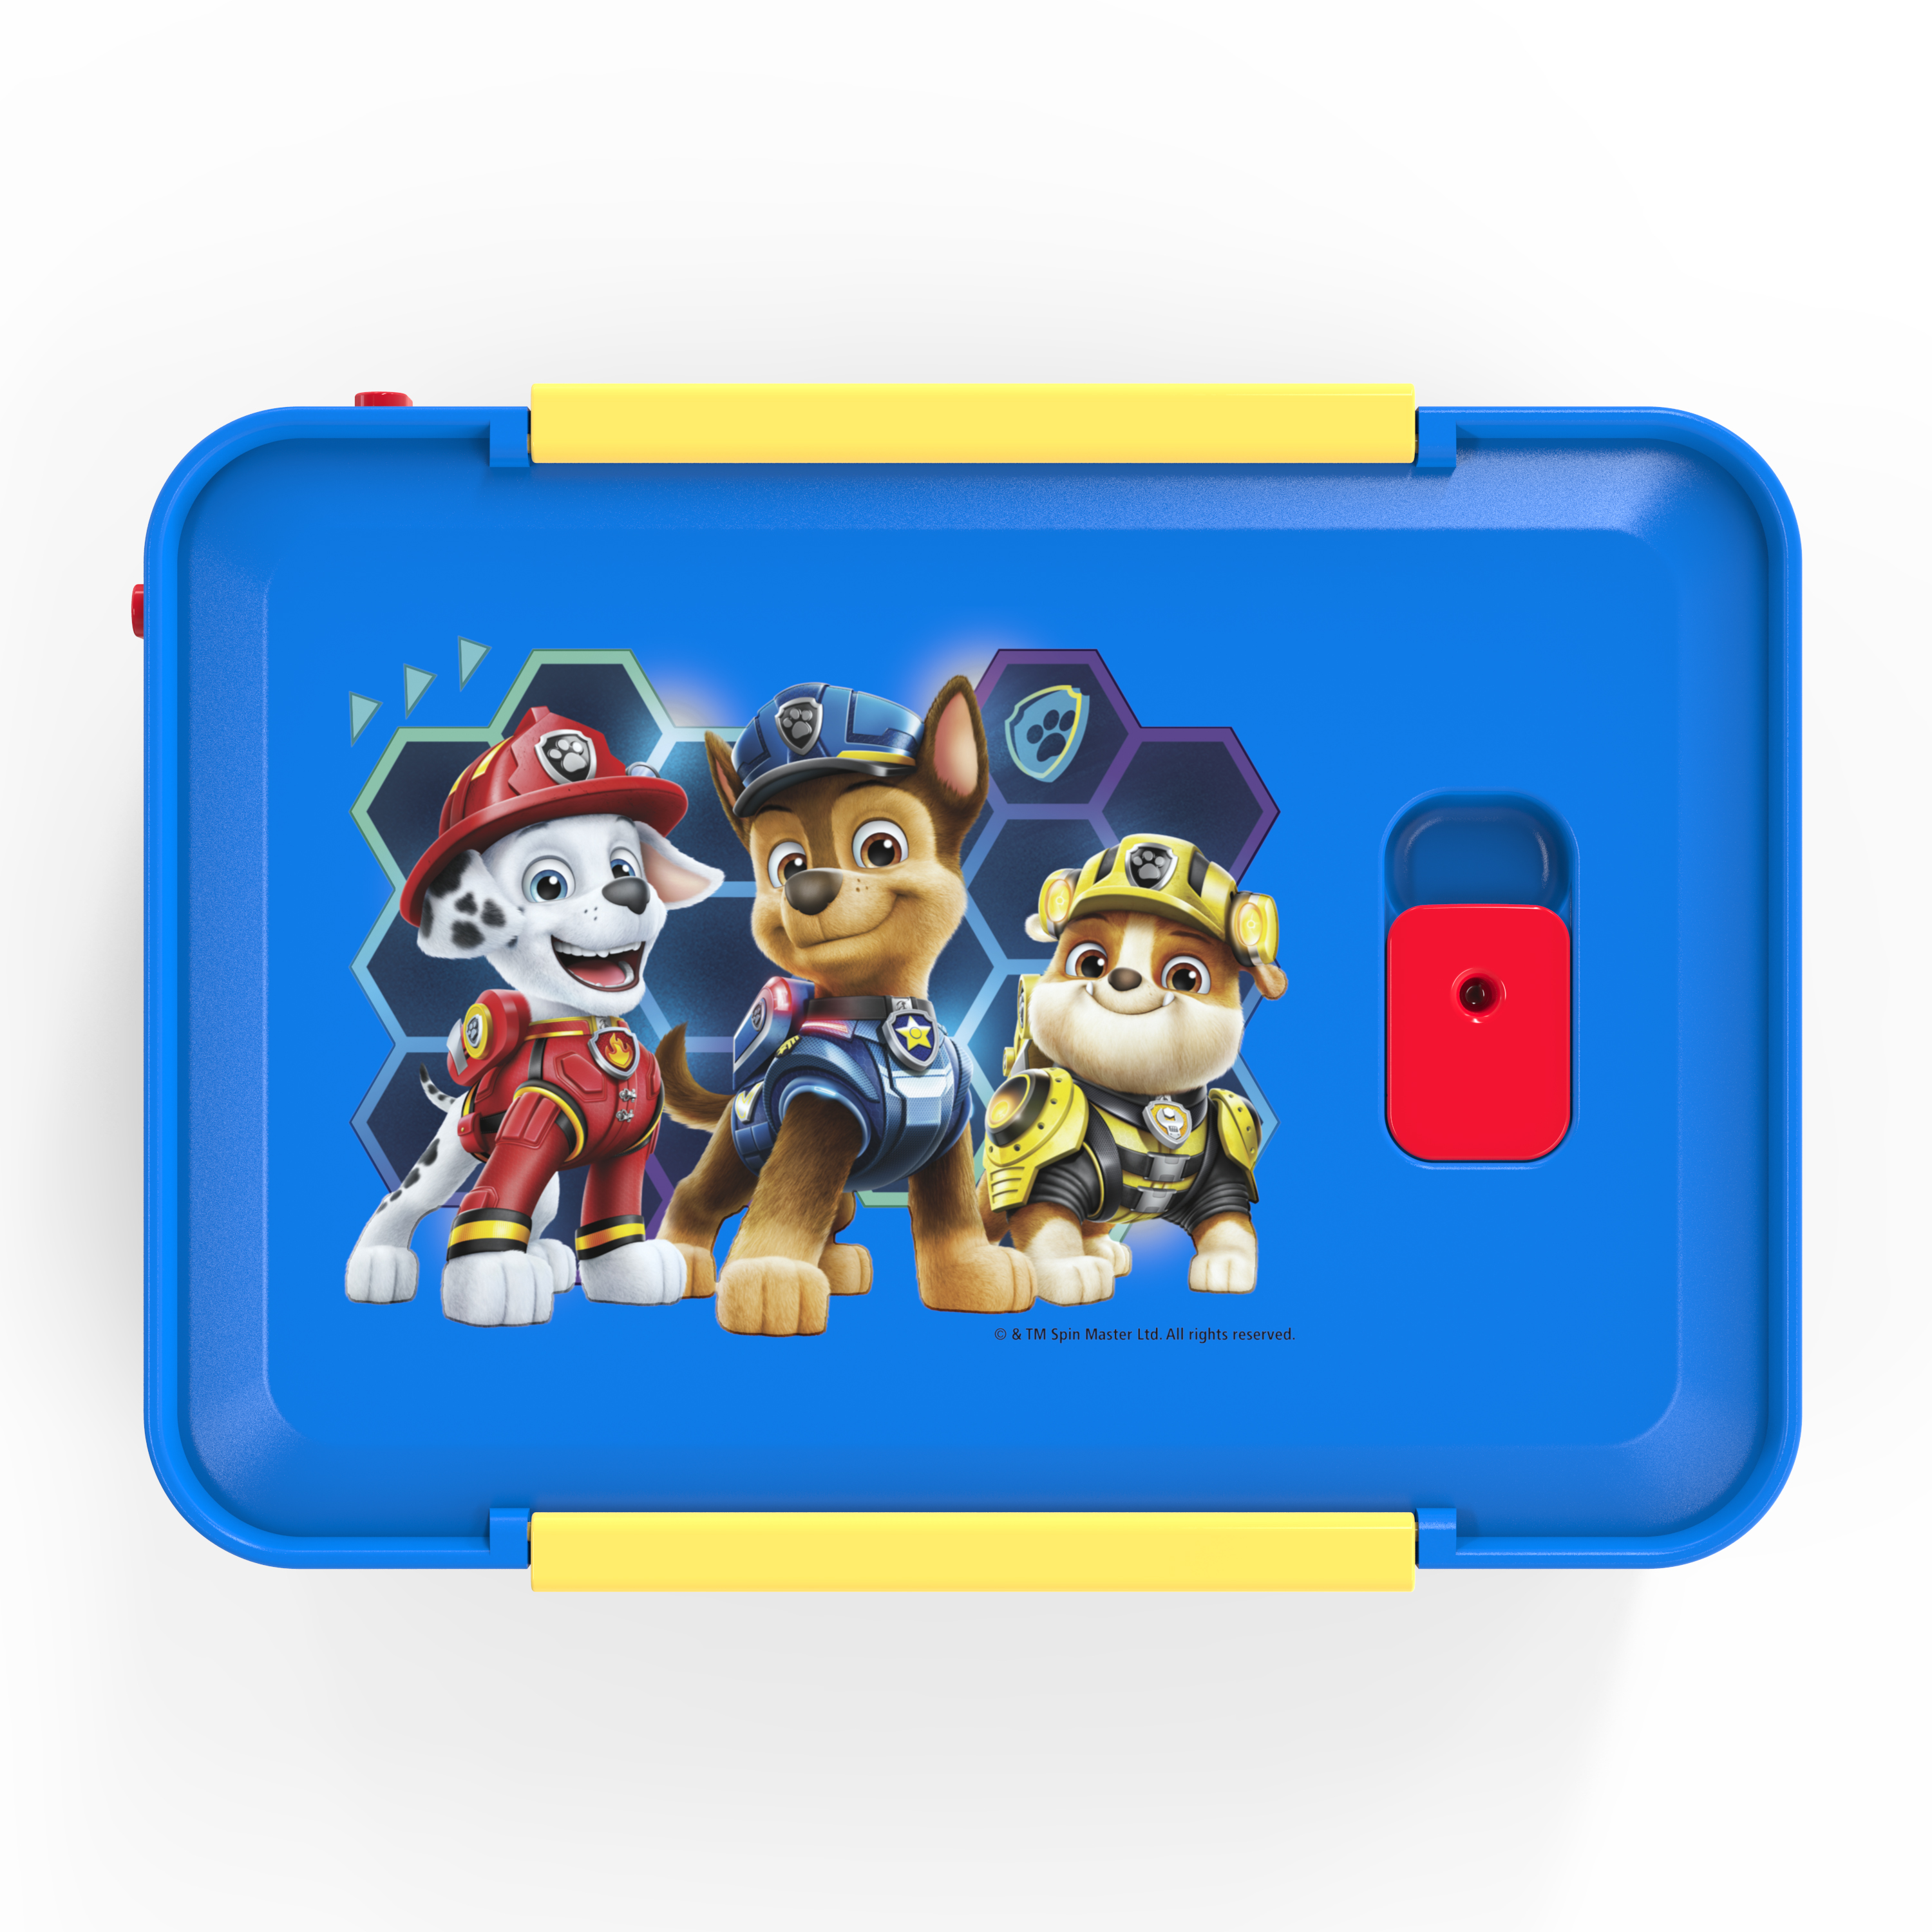 Paw Patrol Movie Reusable Divided Bento Box, Rubble, Marshall and Chase, 3-piece set slideshow image 5